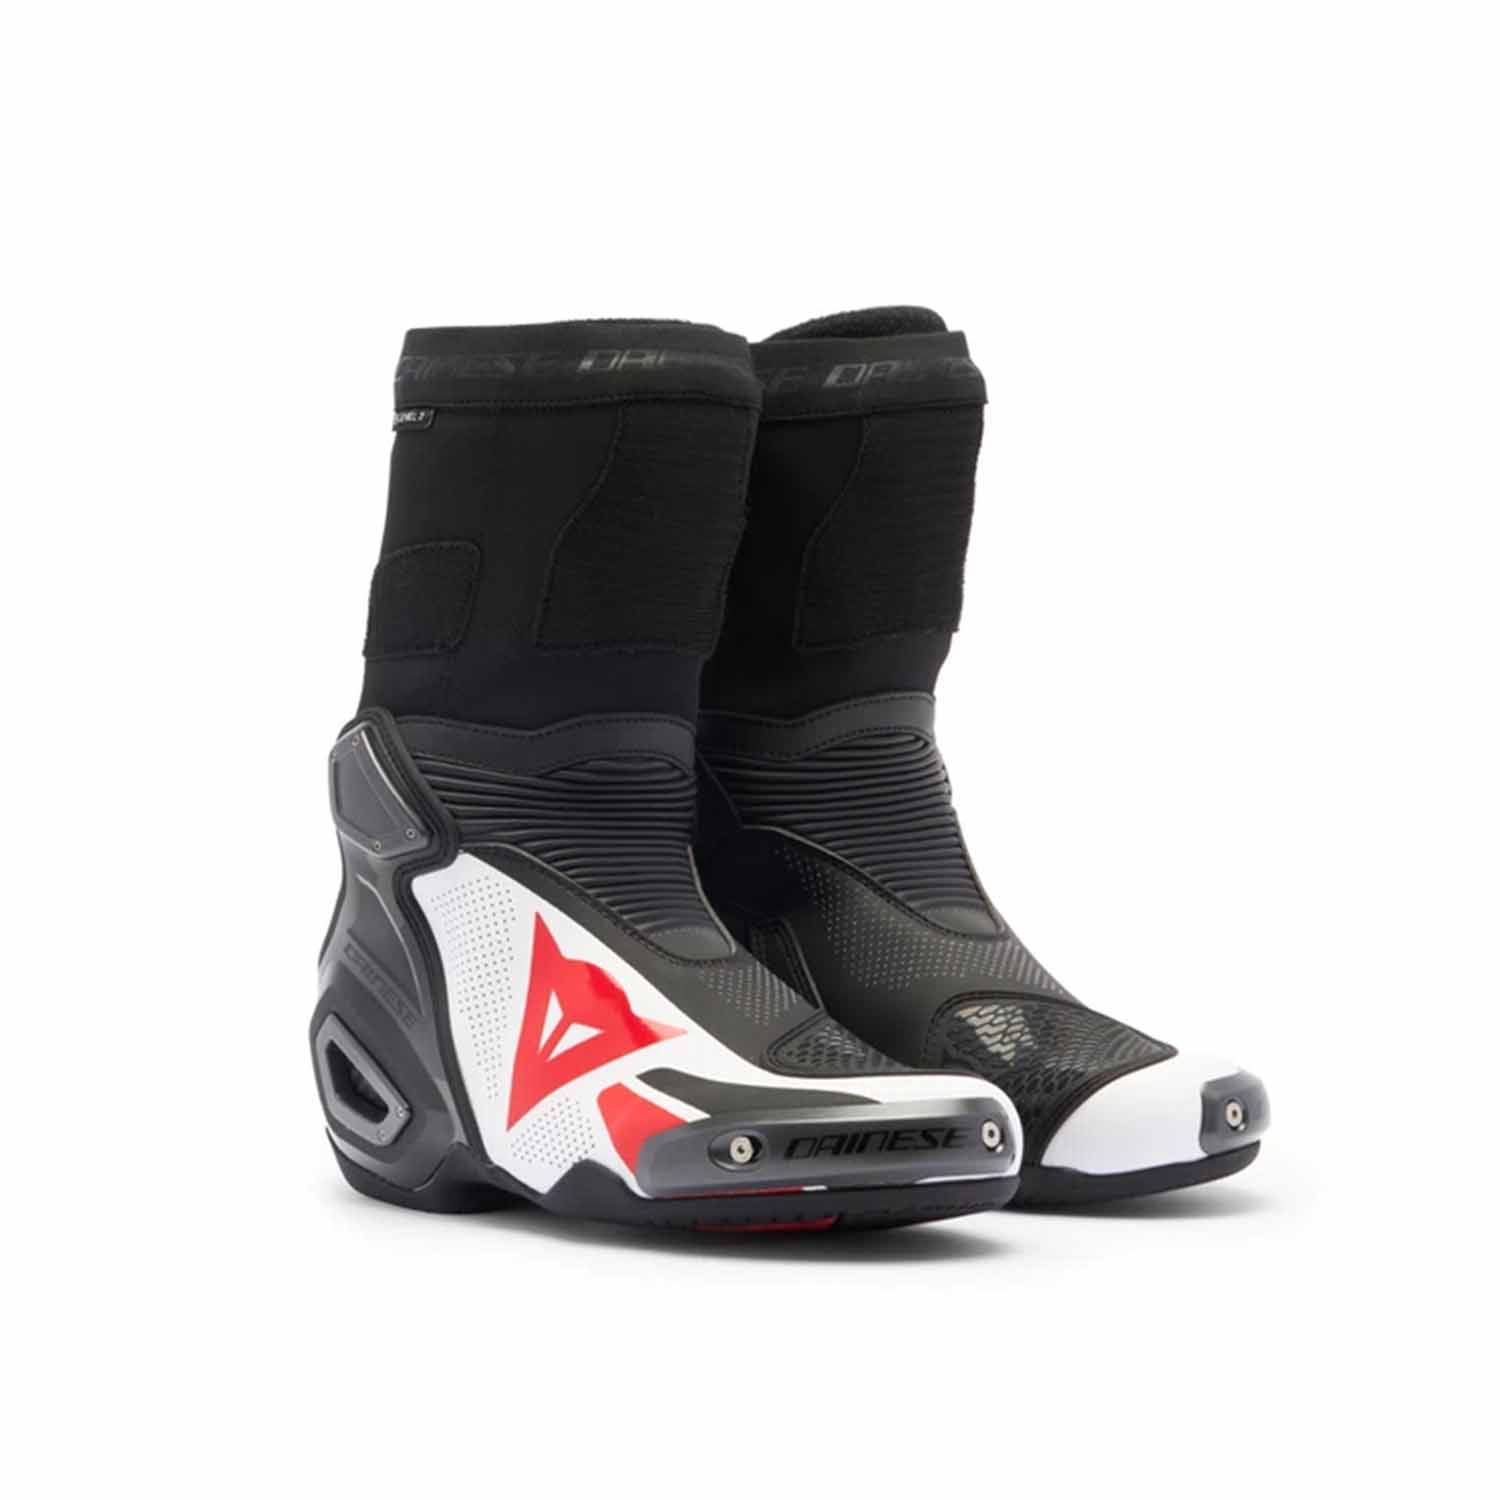 Image of Dainese Axial 2 Air Boots Black White Lava Red Größe 42